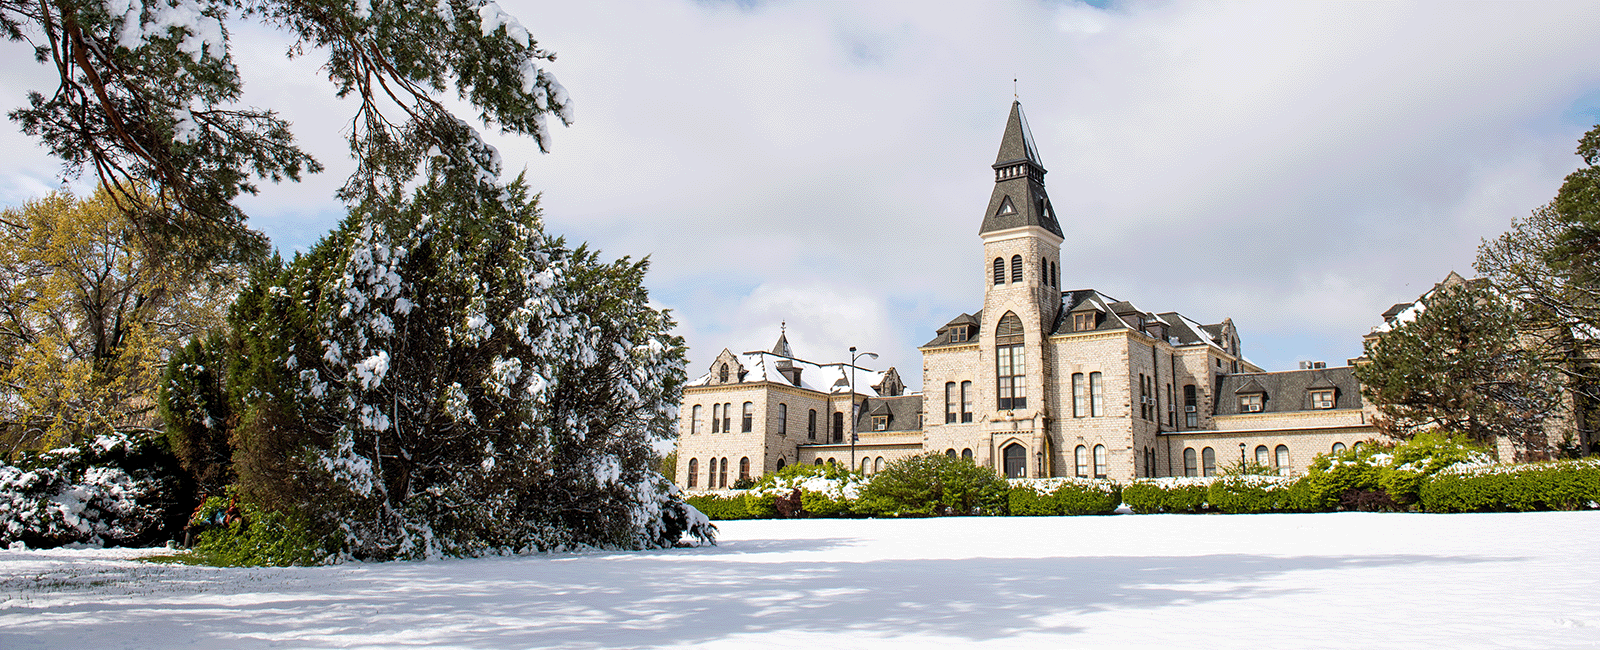 Anderson Hall on a snowy day